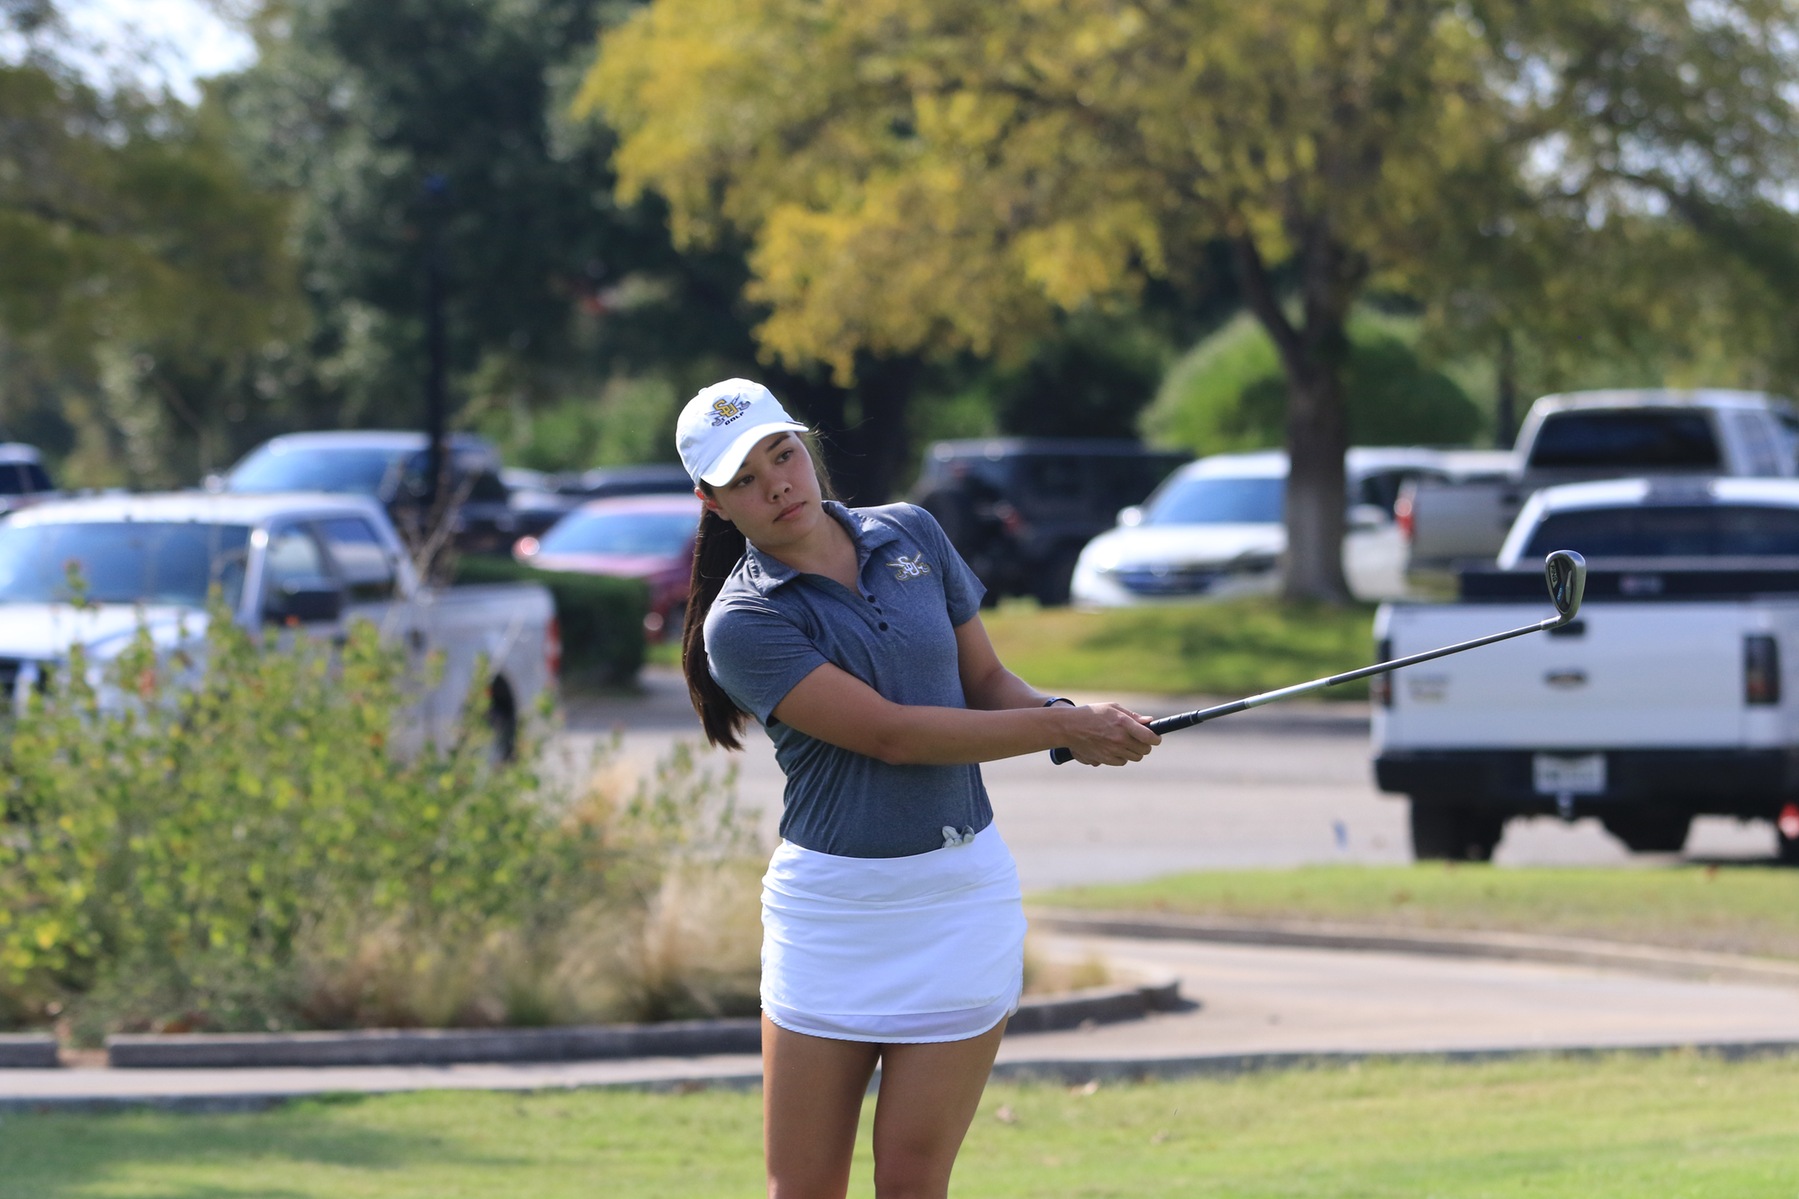 Women's Golf Ends Second Day of Golfweek Invitational in Eighth